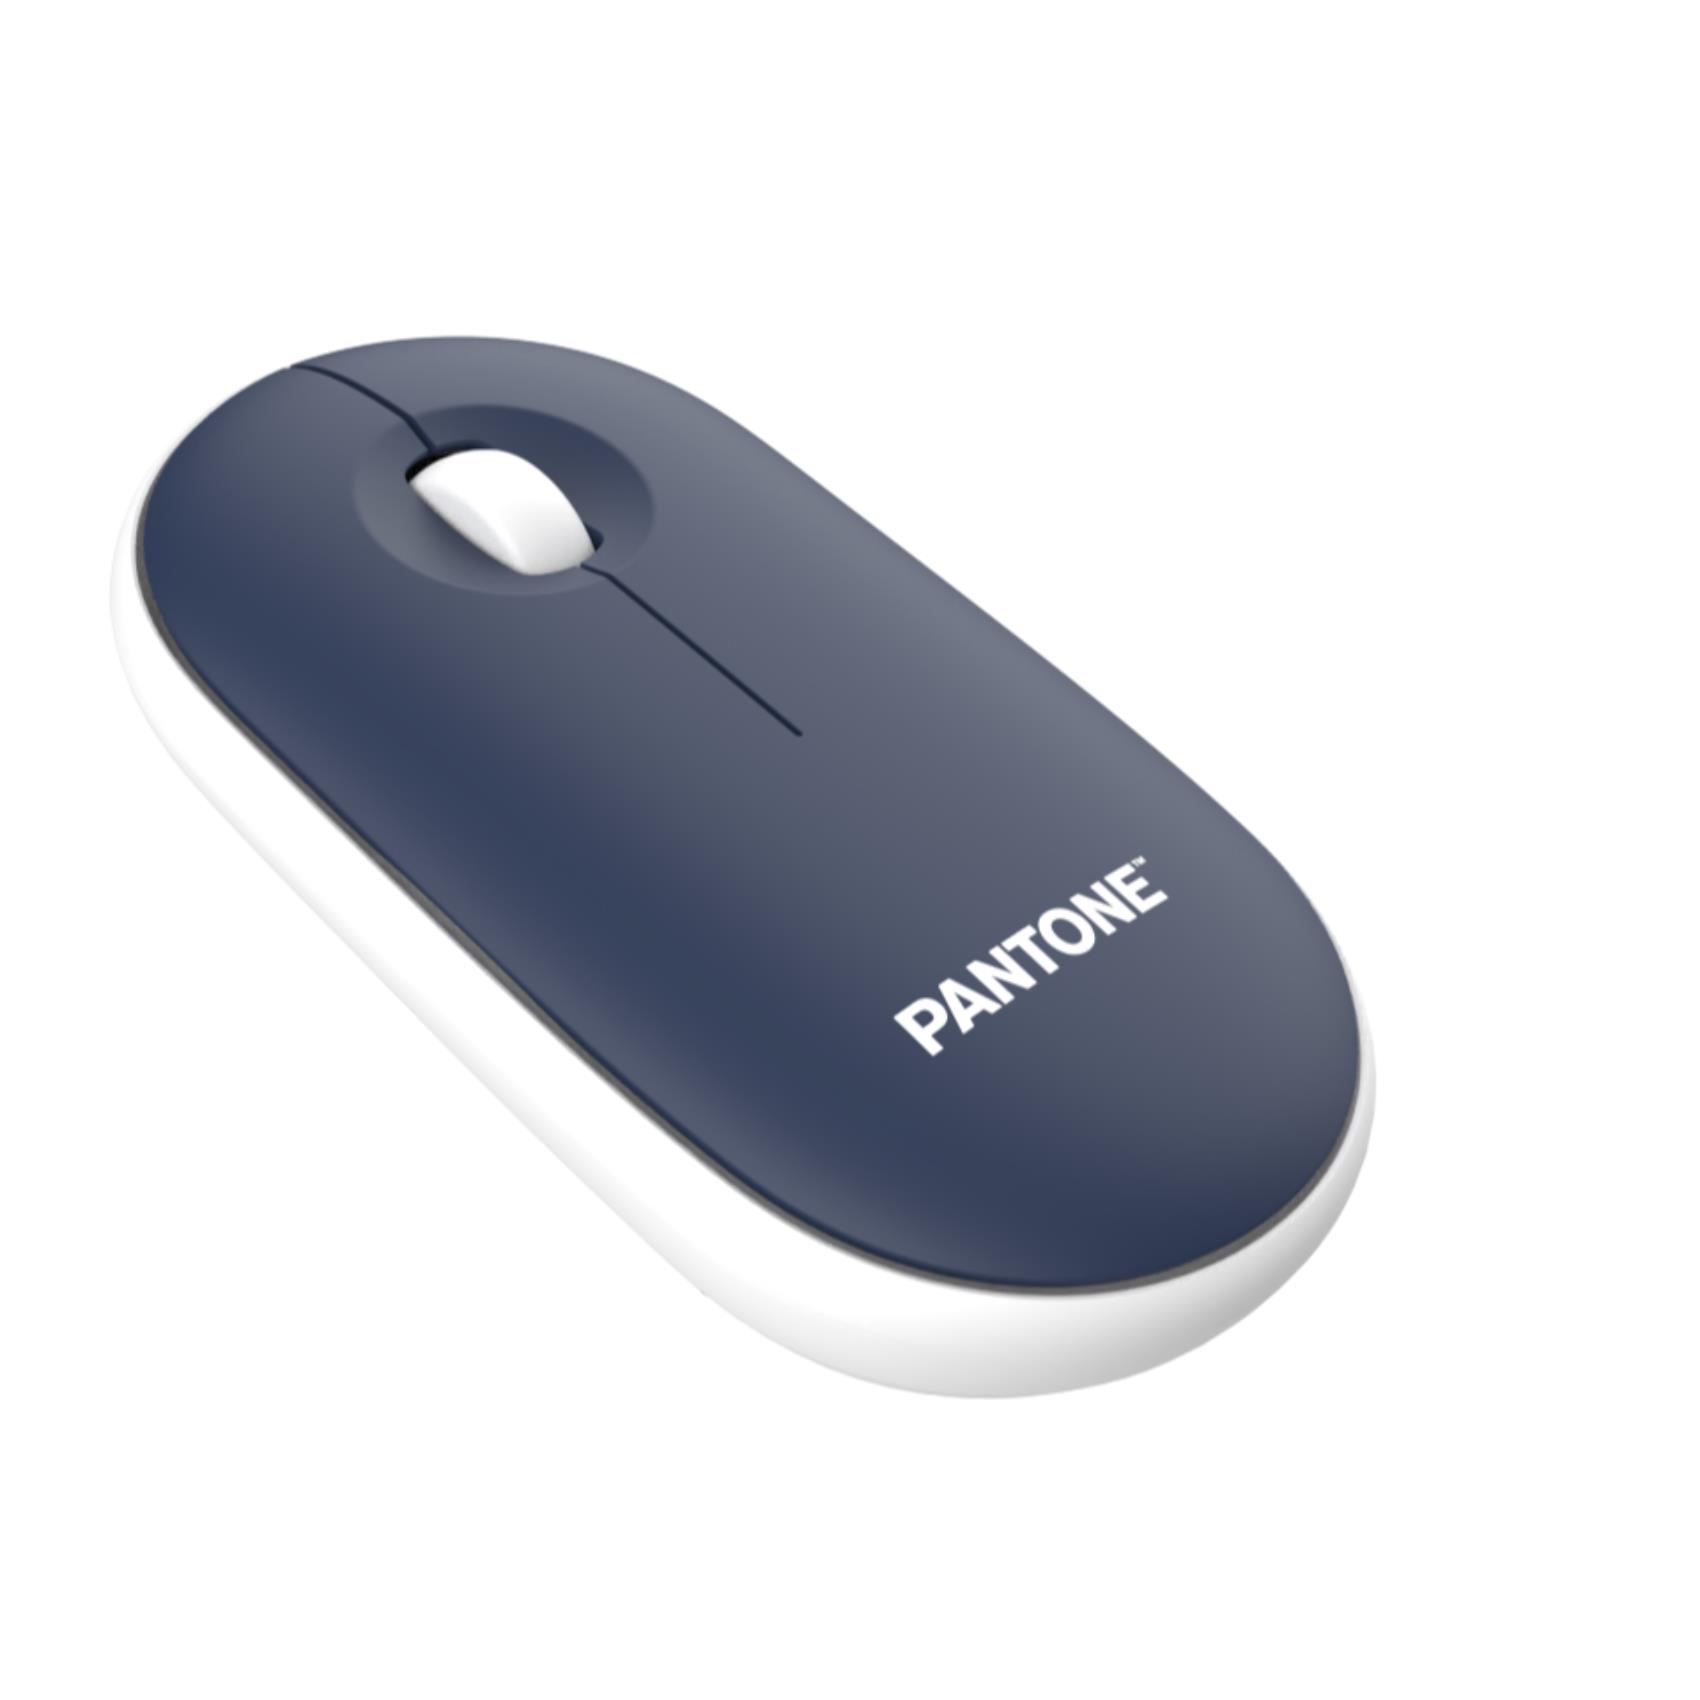 PANTONE MOUSE CON DONGLE NAVY BLUE